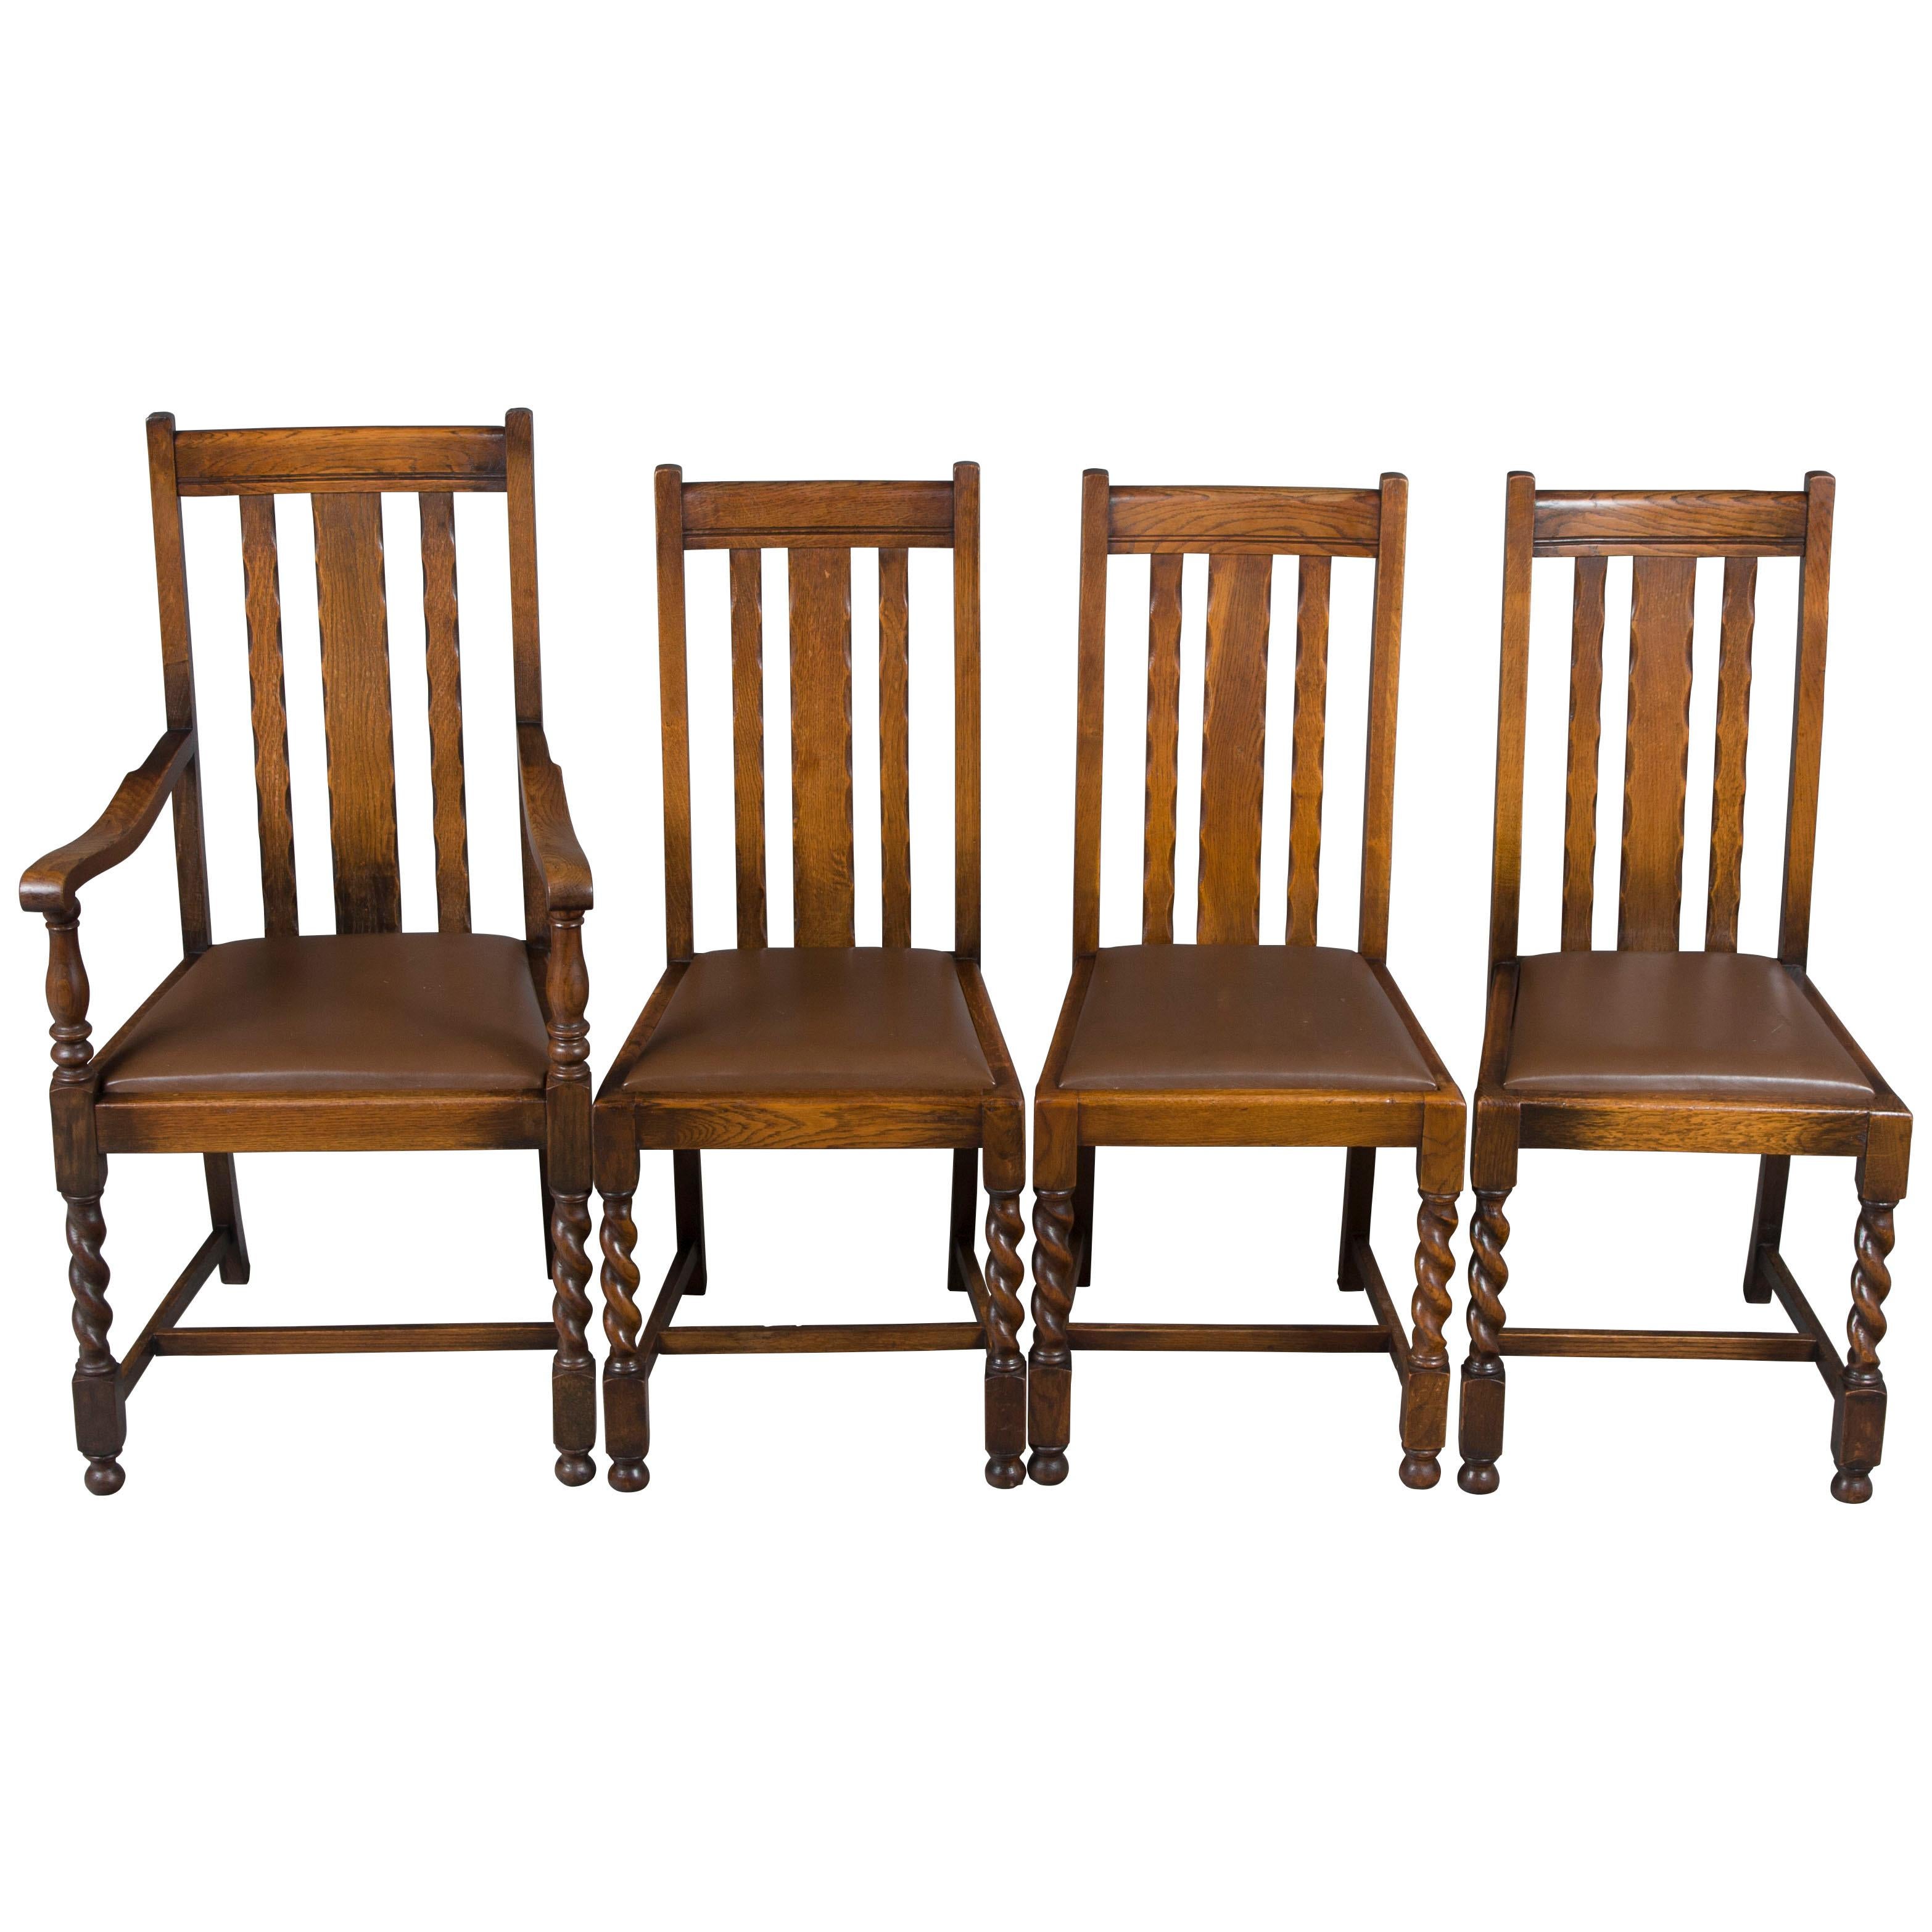 Set of Four Oak Barley Twist Dining Room or Kitchen Chairs